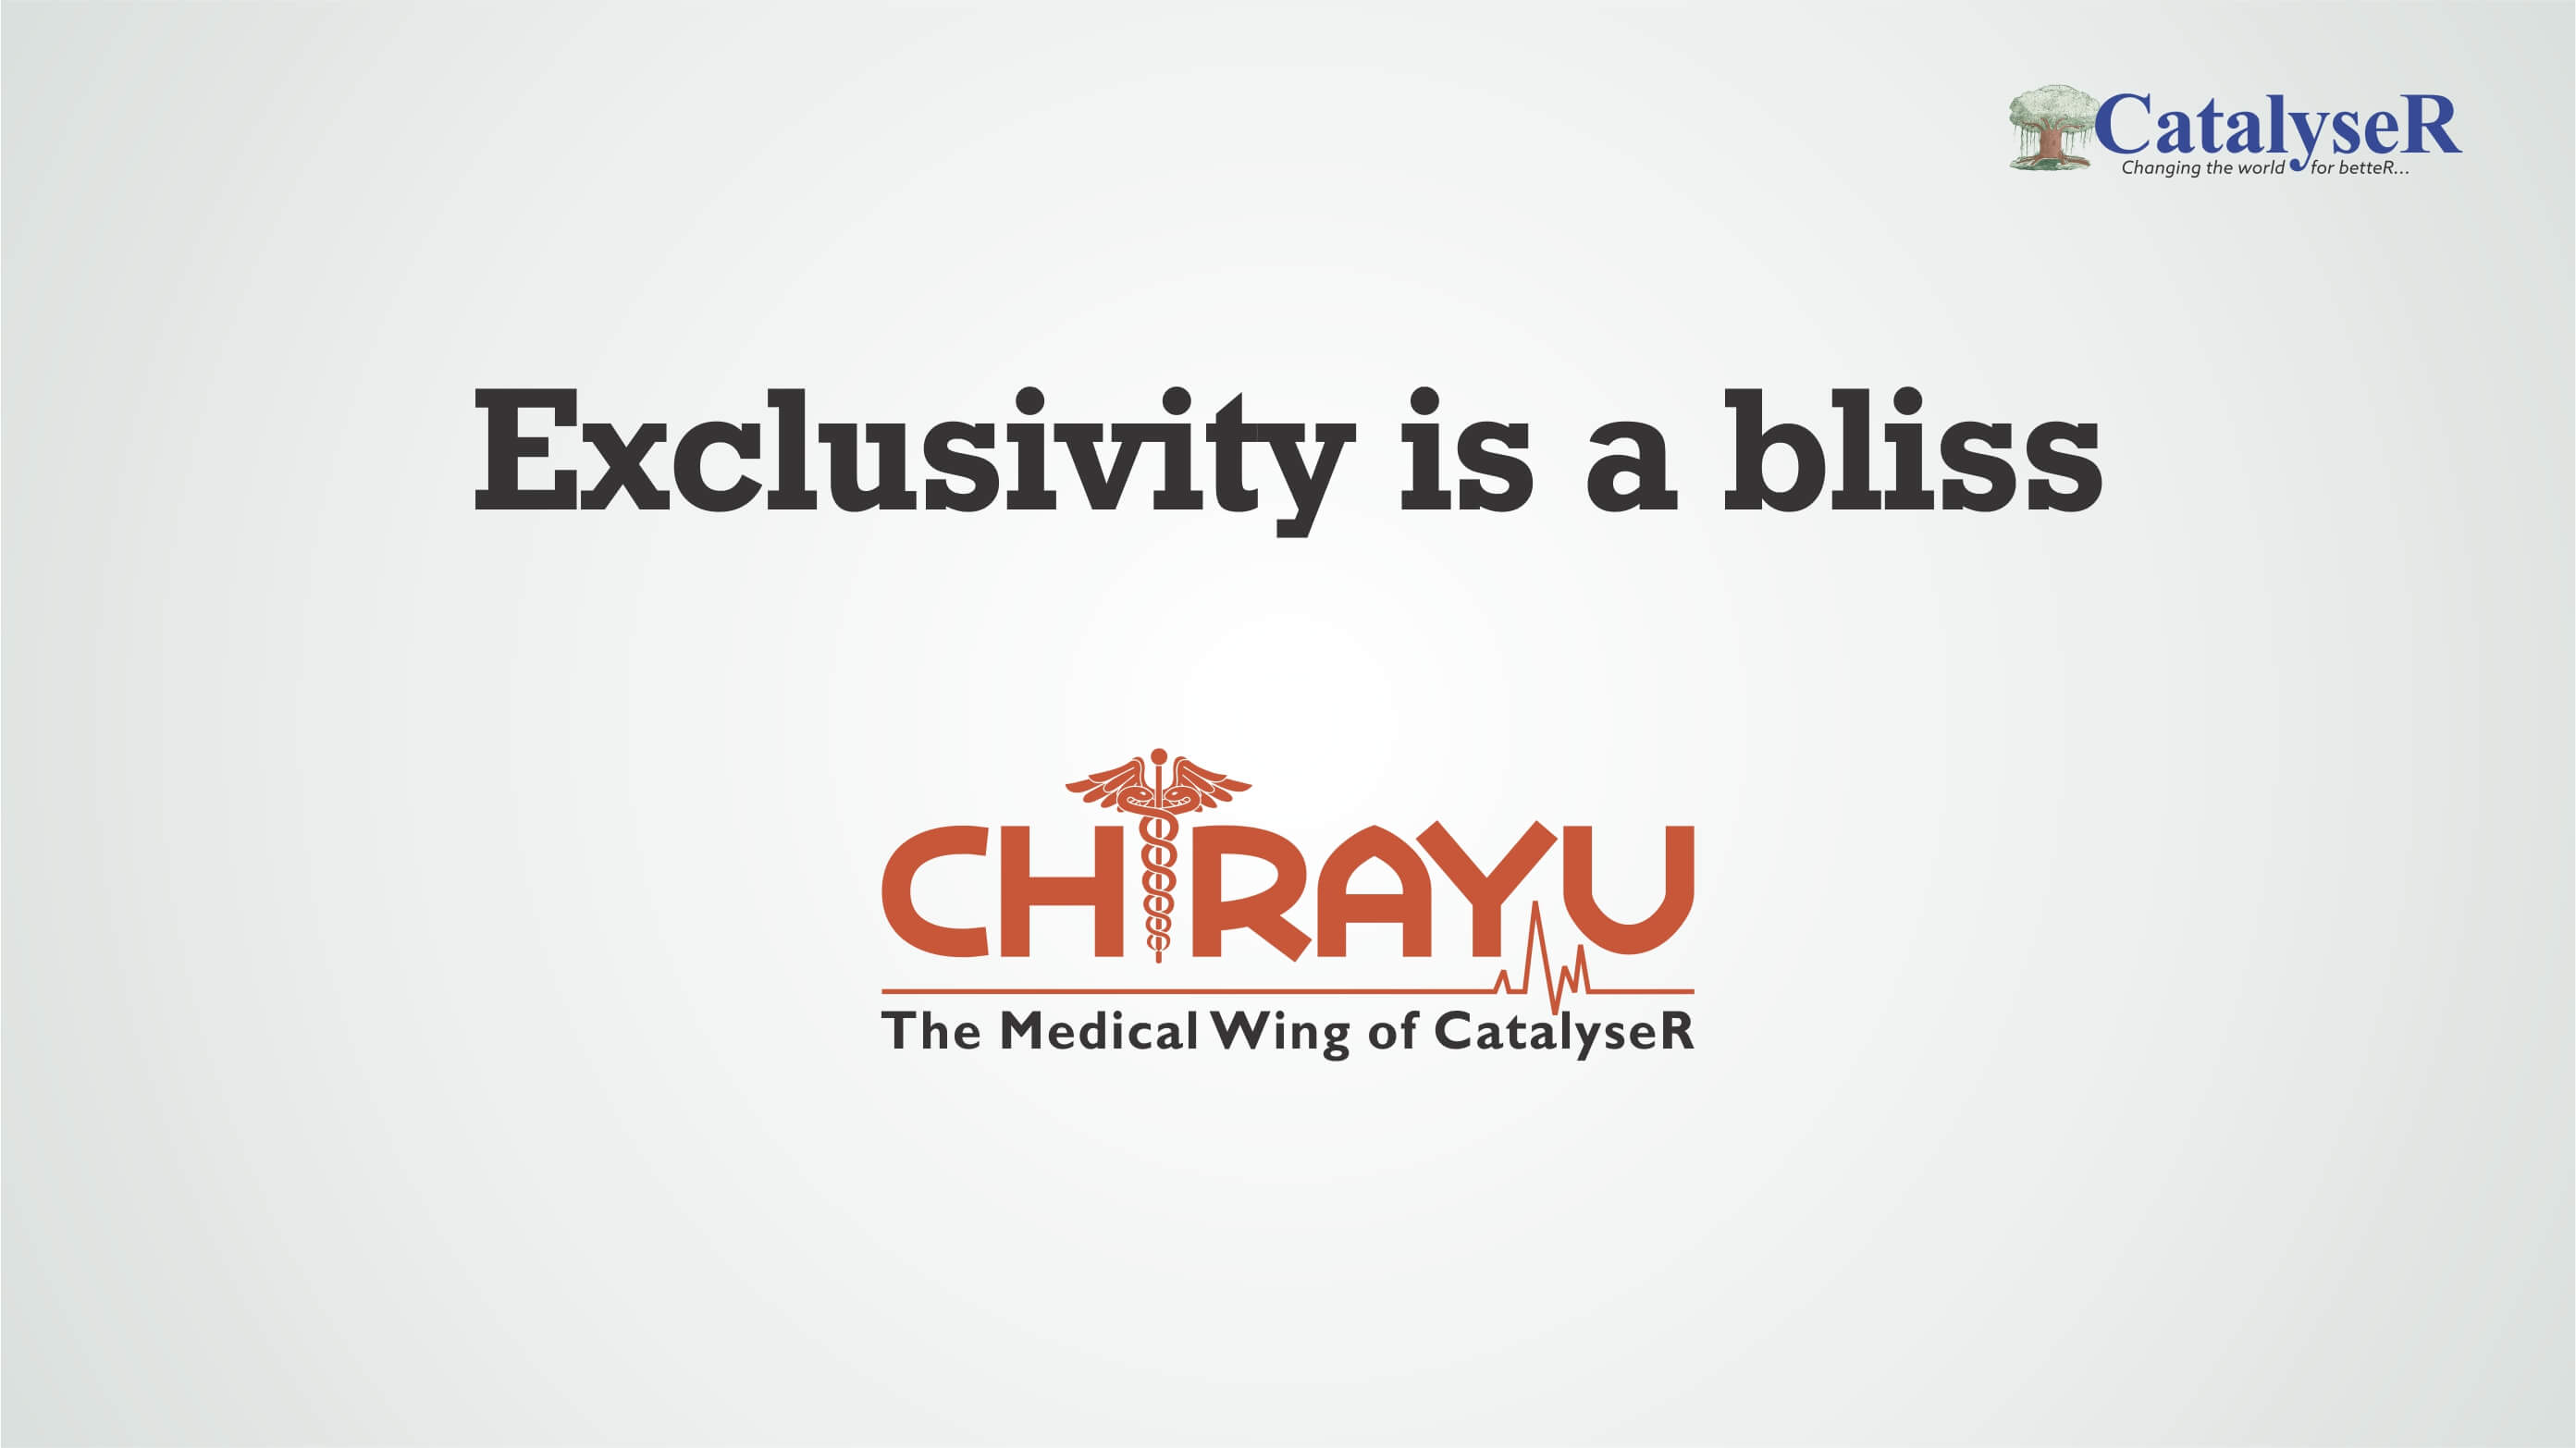 Exclusivity is a bliss chrayu the medical wing of catalyser